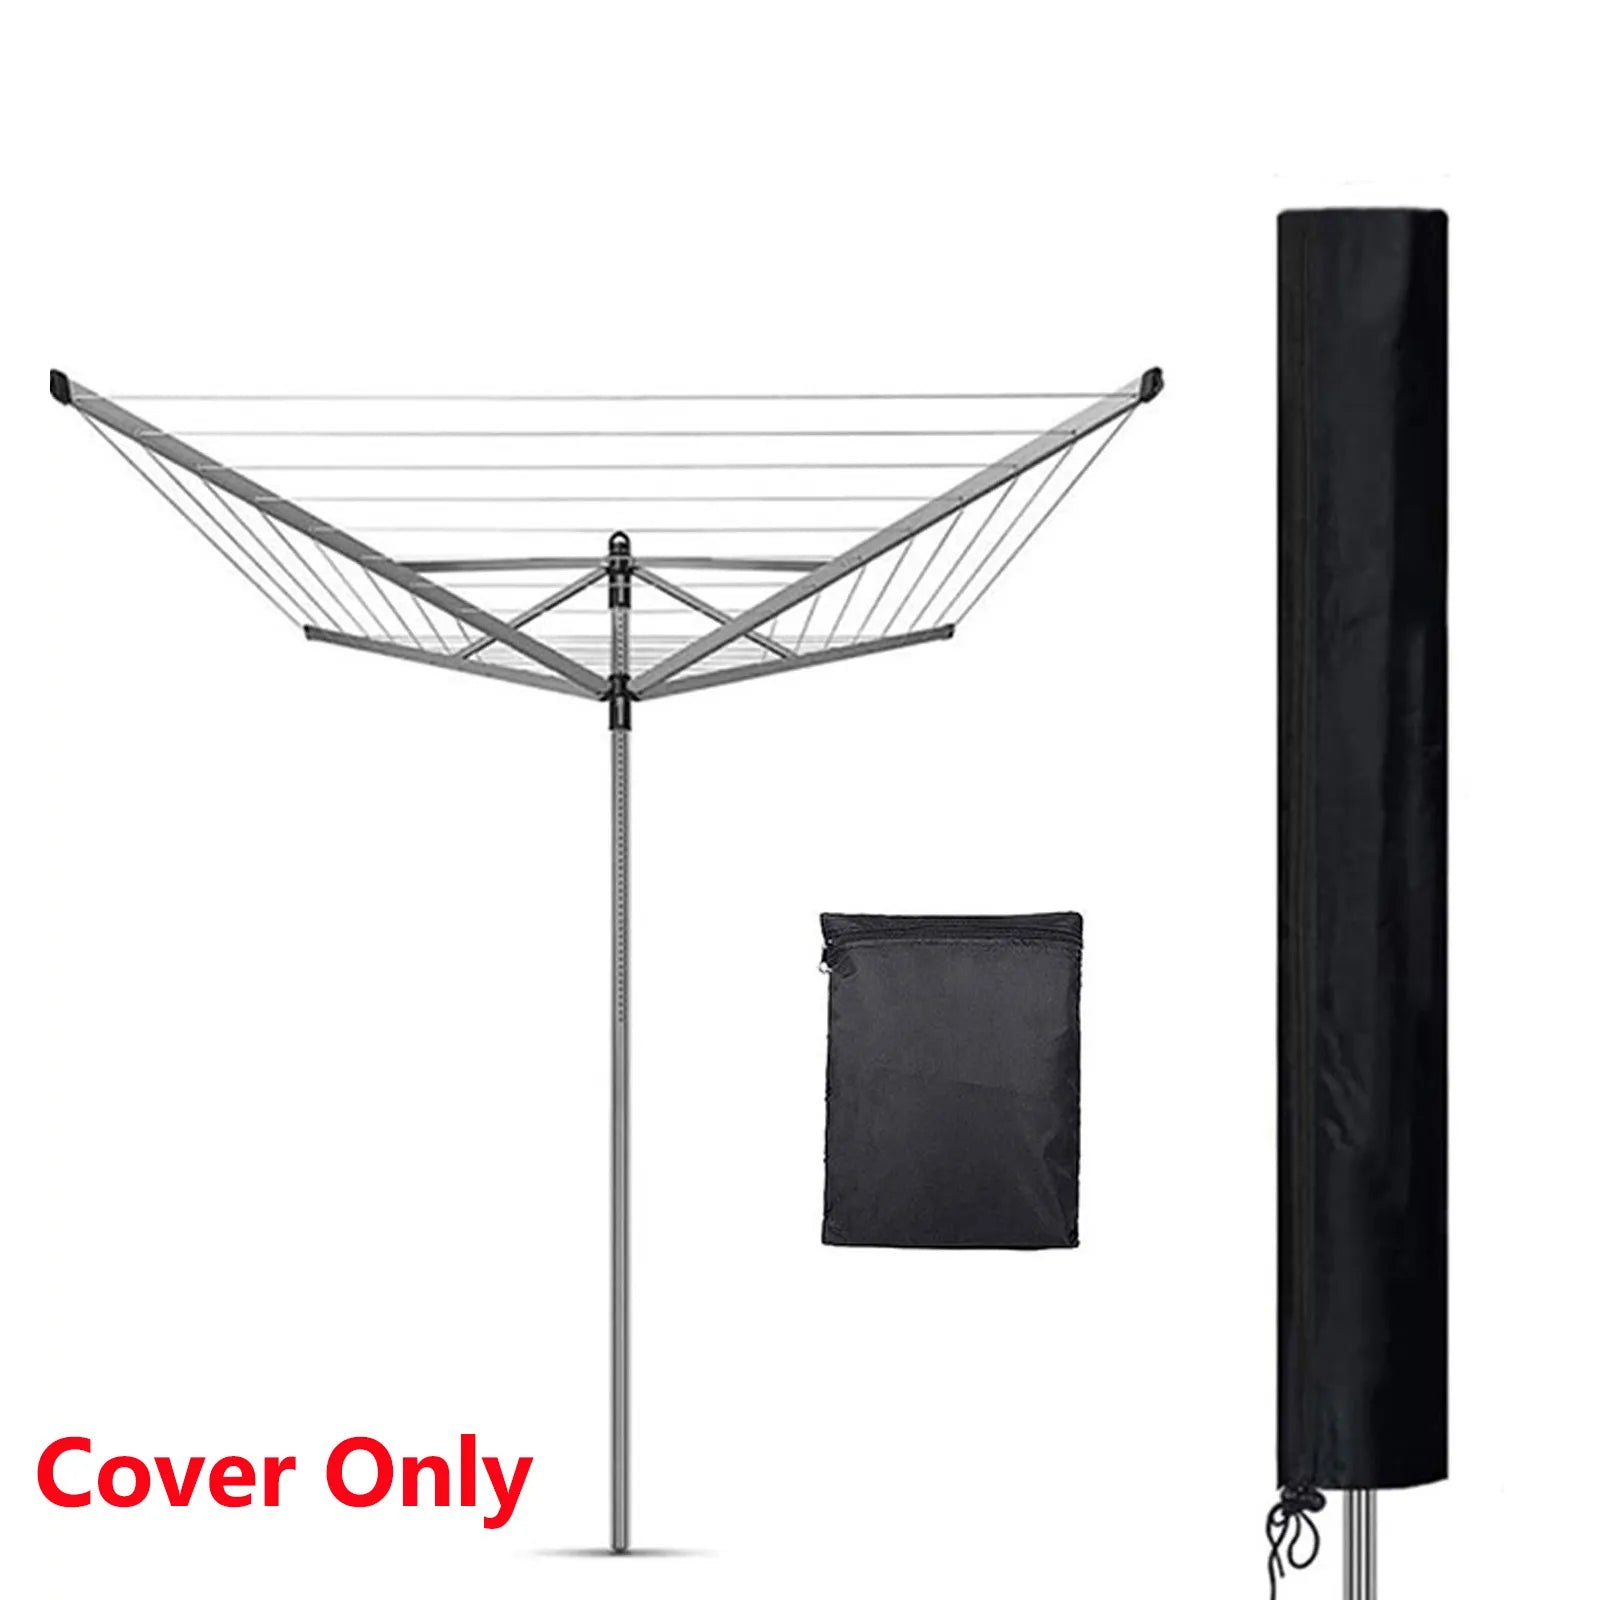 Outdoor Garden Rotary Dryer Washing Line Cover Drying Rack Cover Waterproof 210D Oxford Fabric Windproof Anti-UV Universal Cover